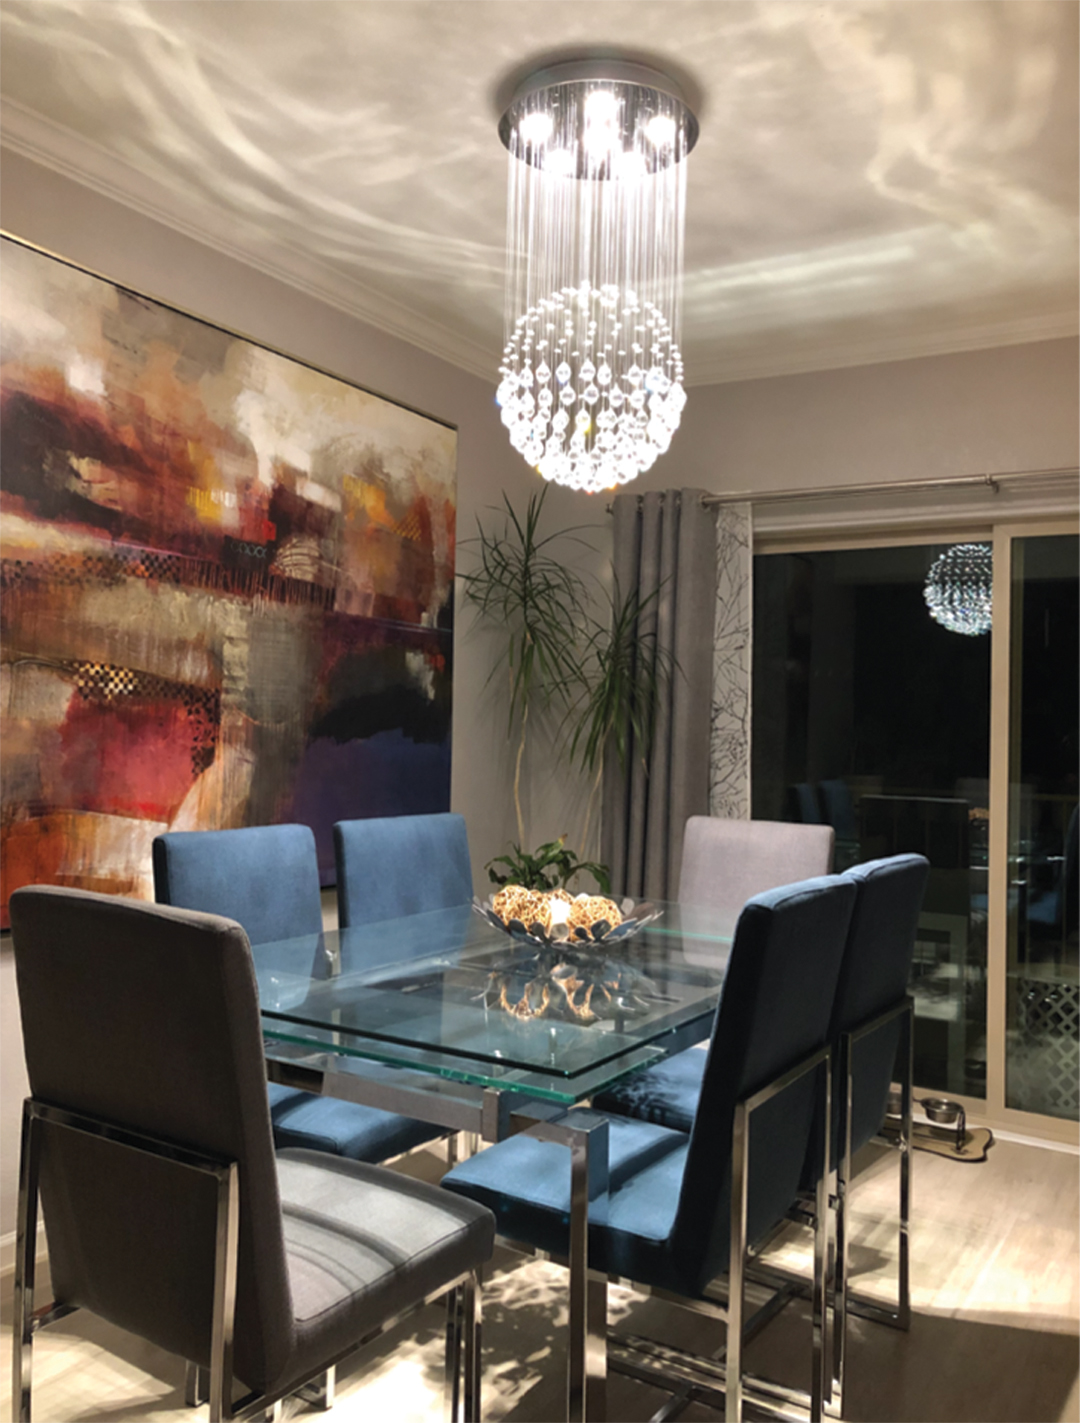 Dining area with crystal chandelier